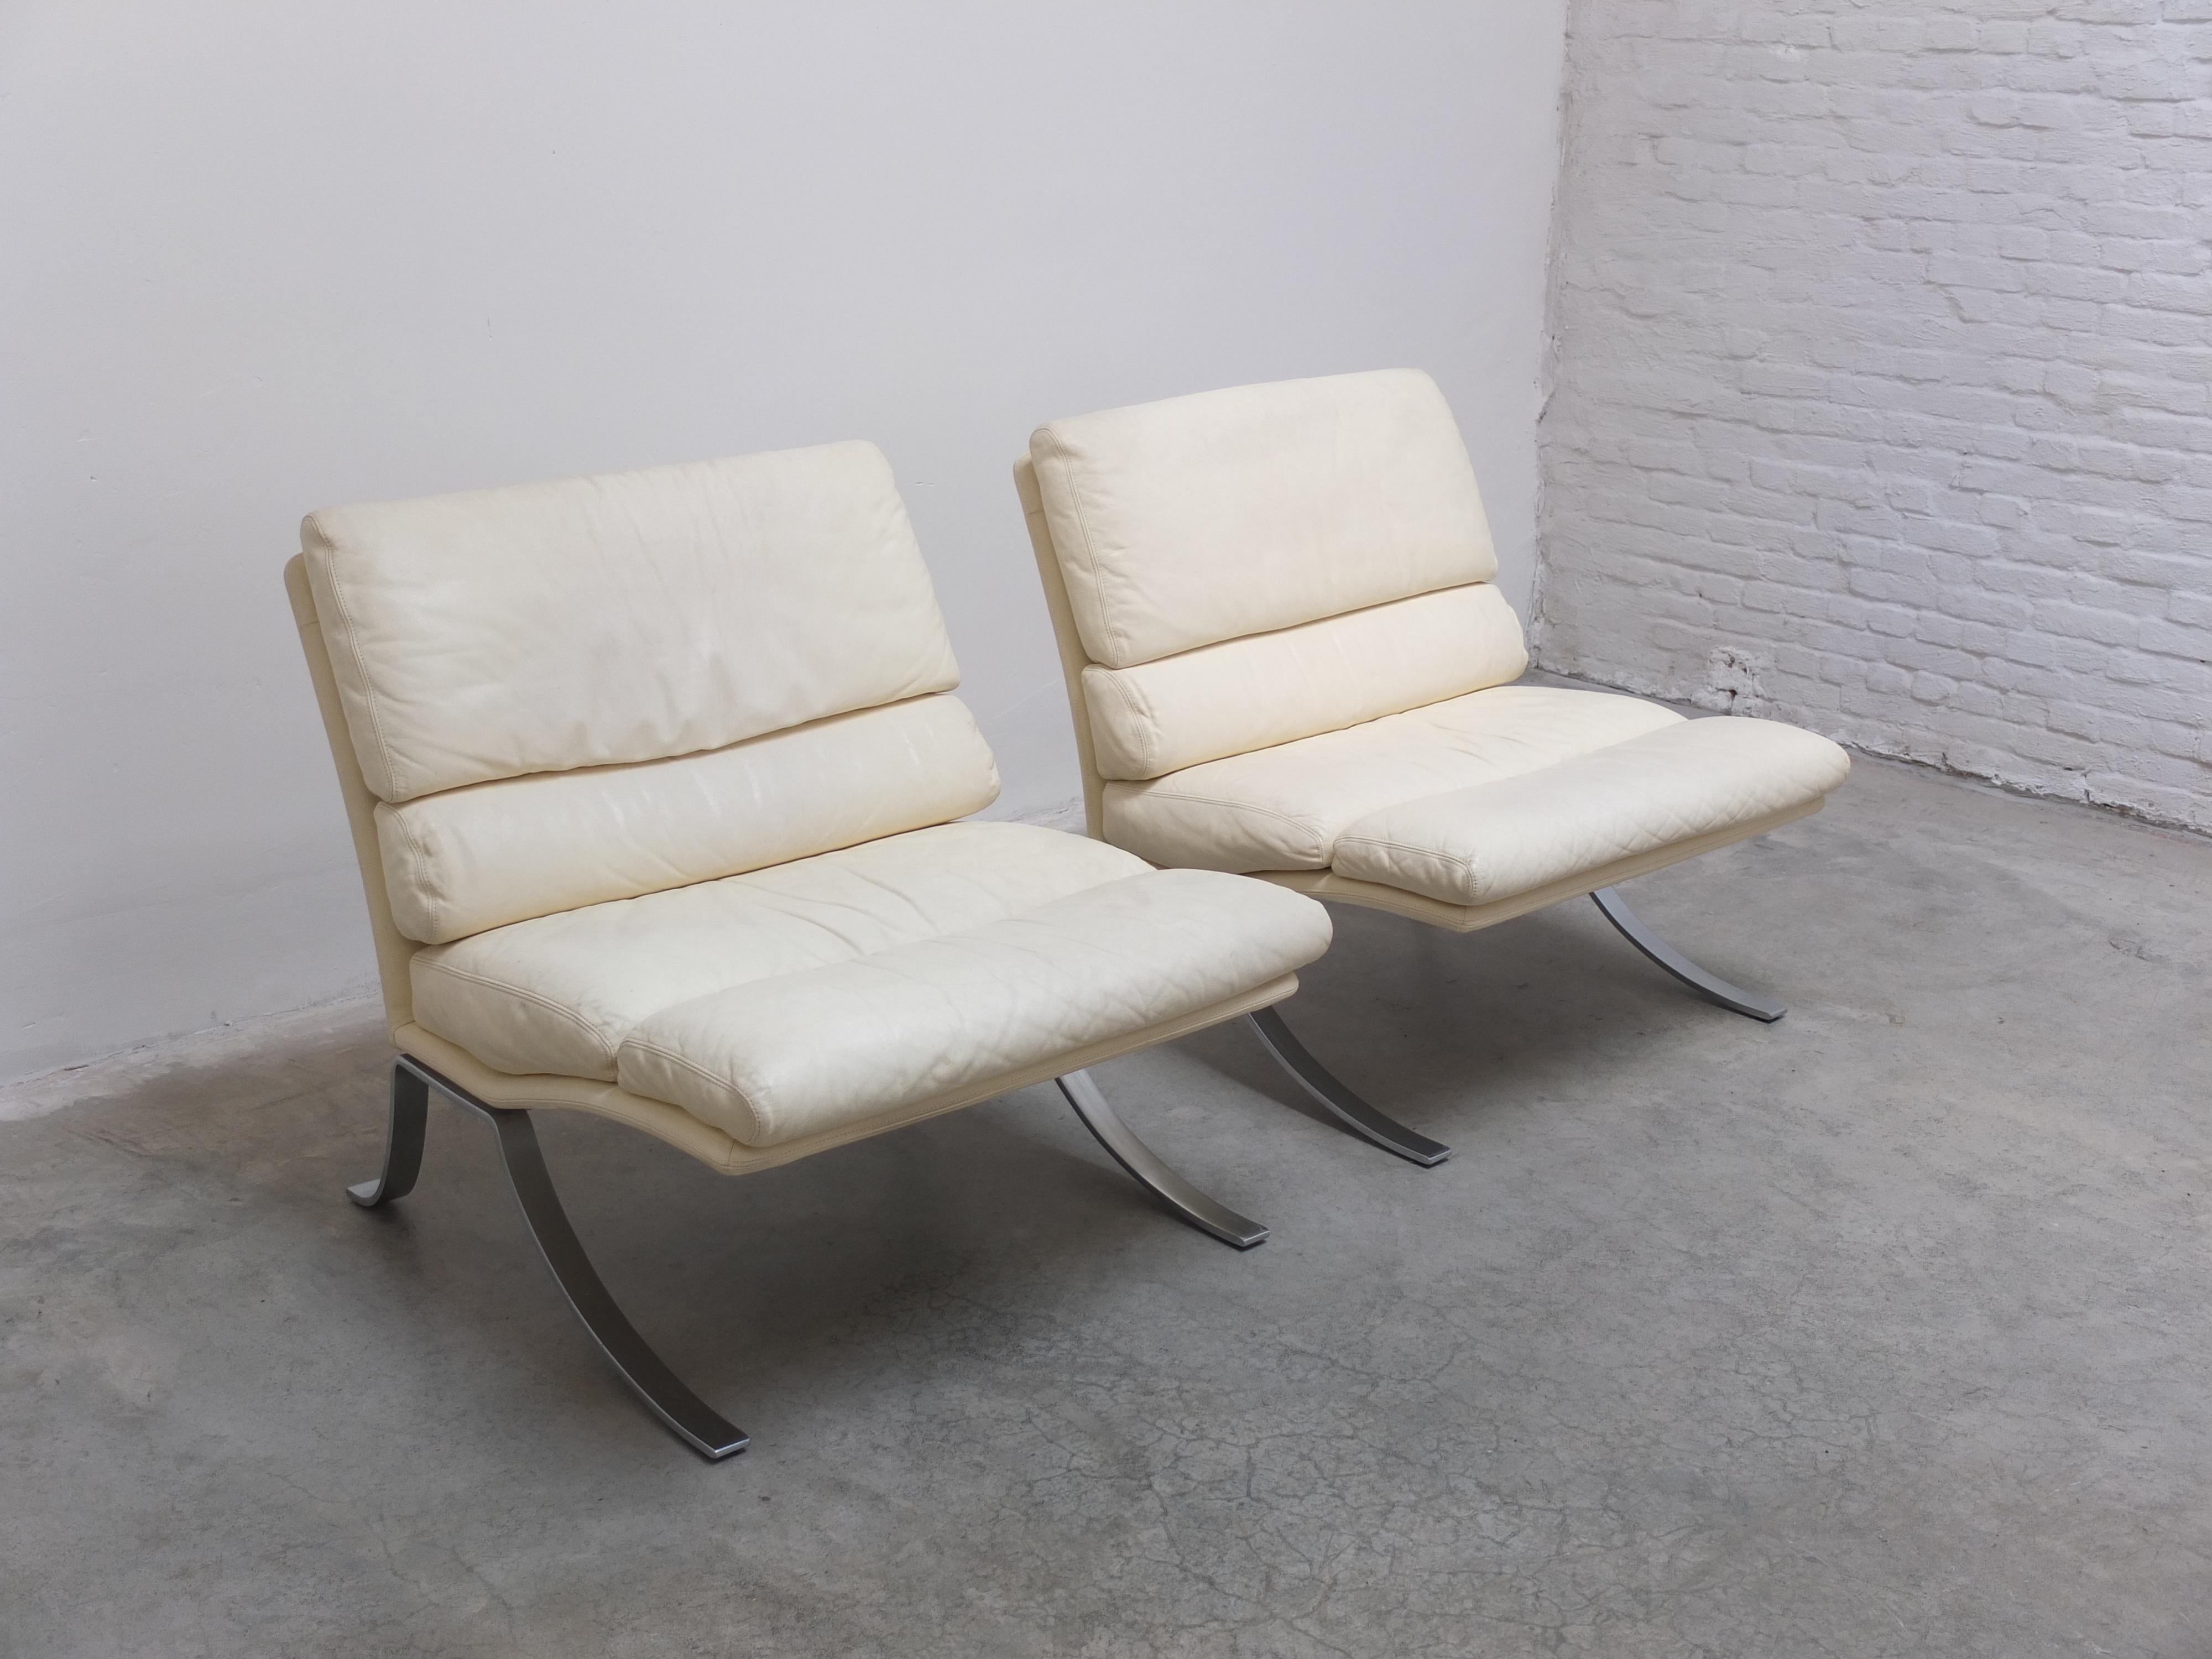 Fantastic pair of lounge chairs with ottoman produced by Durlet in Belgium during the 1970s. The seats are made of high quality cream-colored leather and they rest on a beautiful chromed flat steel base with very elegant legs. This pair comes with a